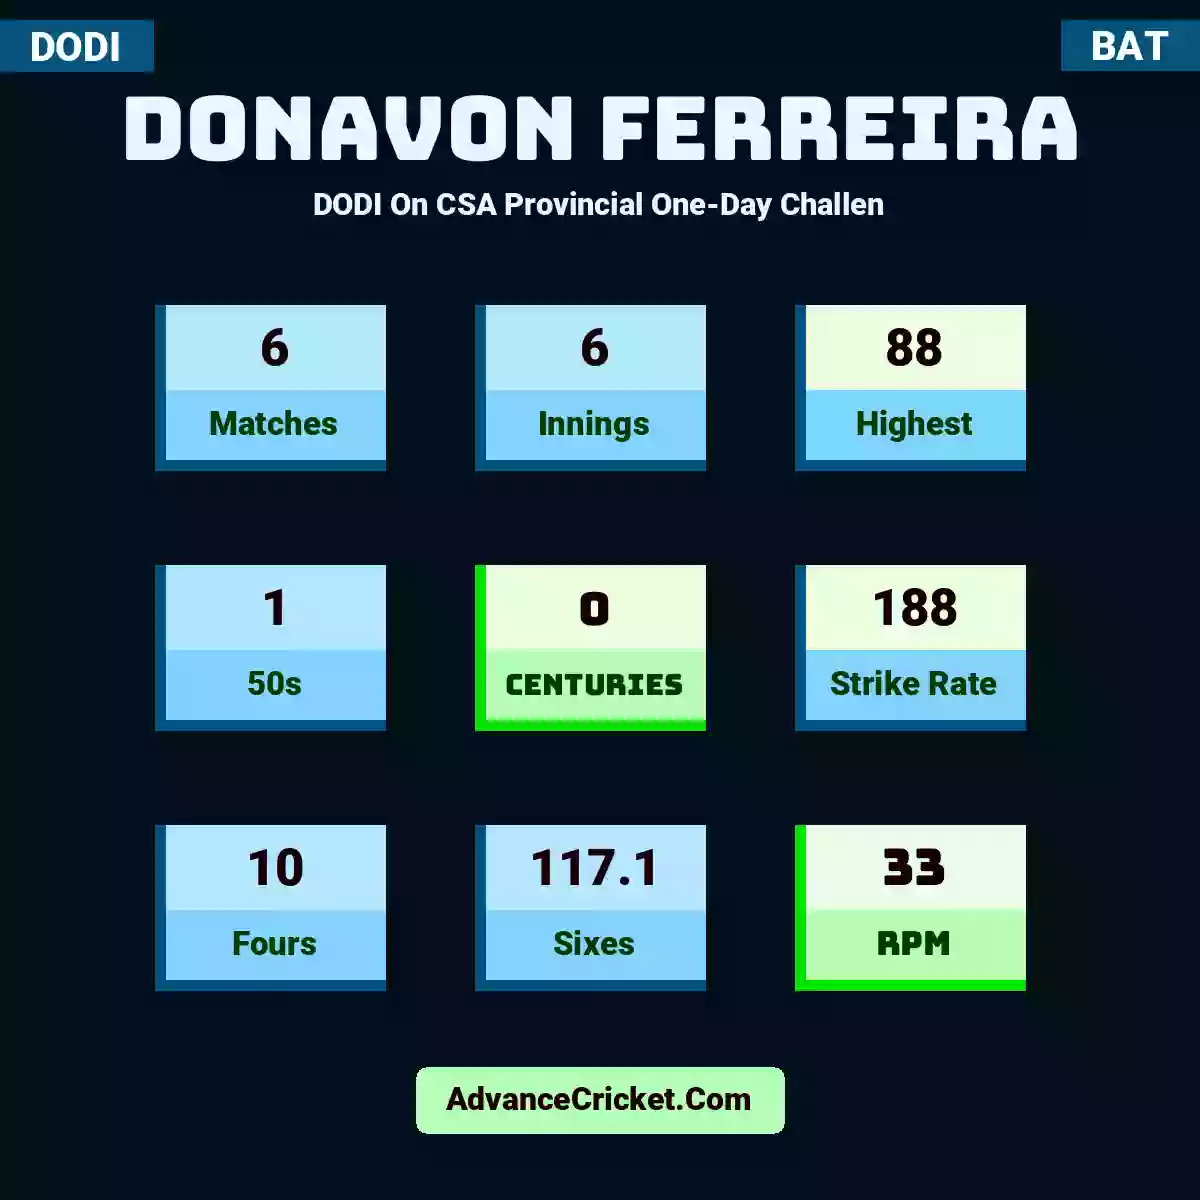 Donavon Ferreira DODI  On CSA Provincial One-Day Challen, Donavon Ferreira played 6 matches, scored 88 runs as highest, 1 half-centuries, and 0 centuries, with a strike rate of 188. D.Ferreira hit 10 fours and 117.1 sixes, with an RPM of 33.